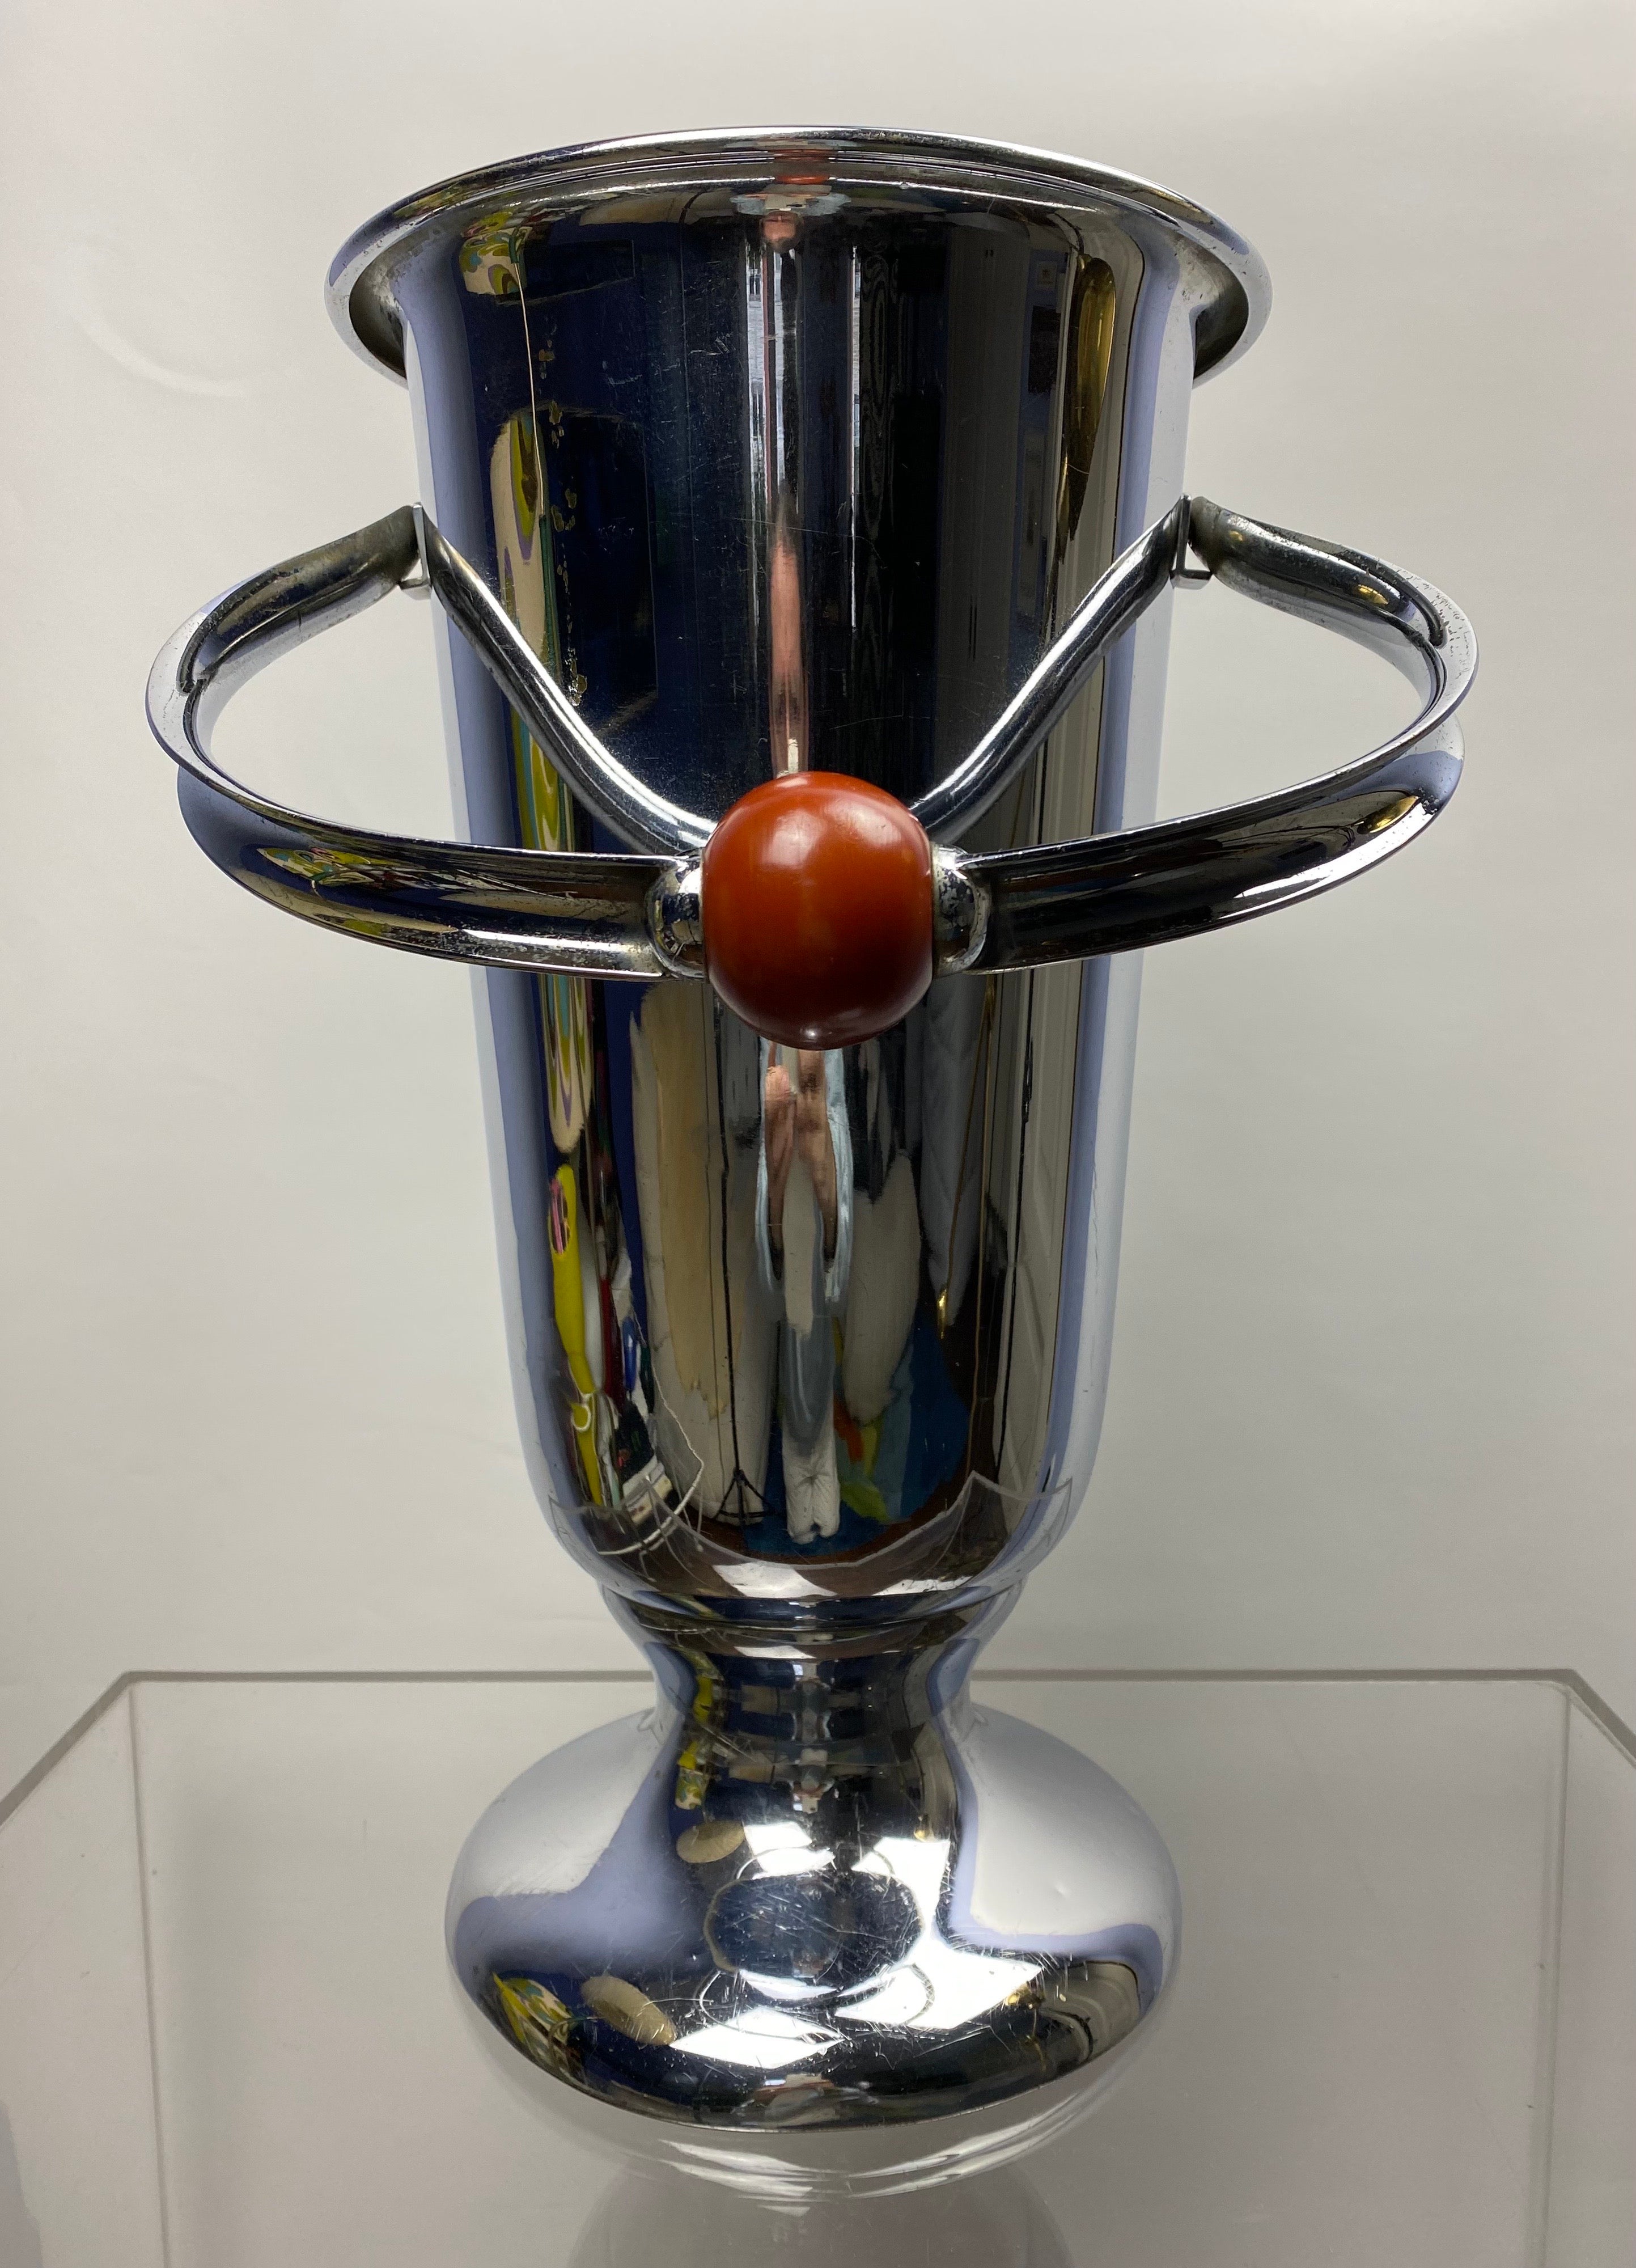 A rare and large impressive Art Deco Champagne or Wine Cooler from the WMF, Würtembergische Metallwarenfabrik, Germany, 1920s.
With a beautiful amber-colored ball of early half-synthetical plastic called Galalith mounted on the handle.
The